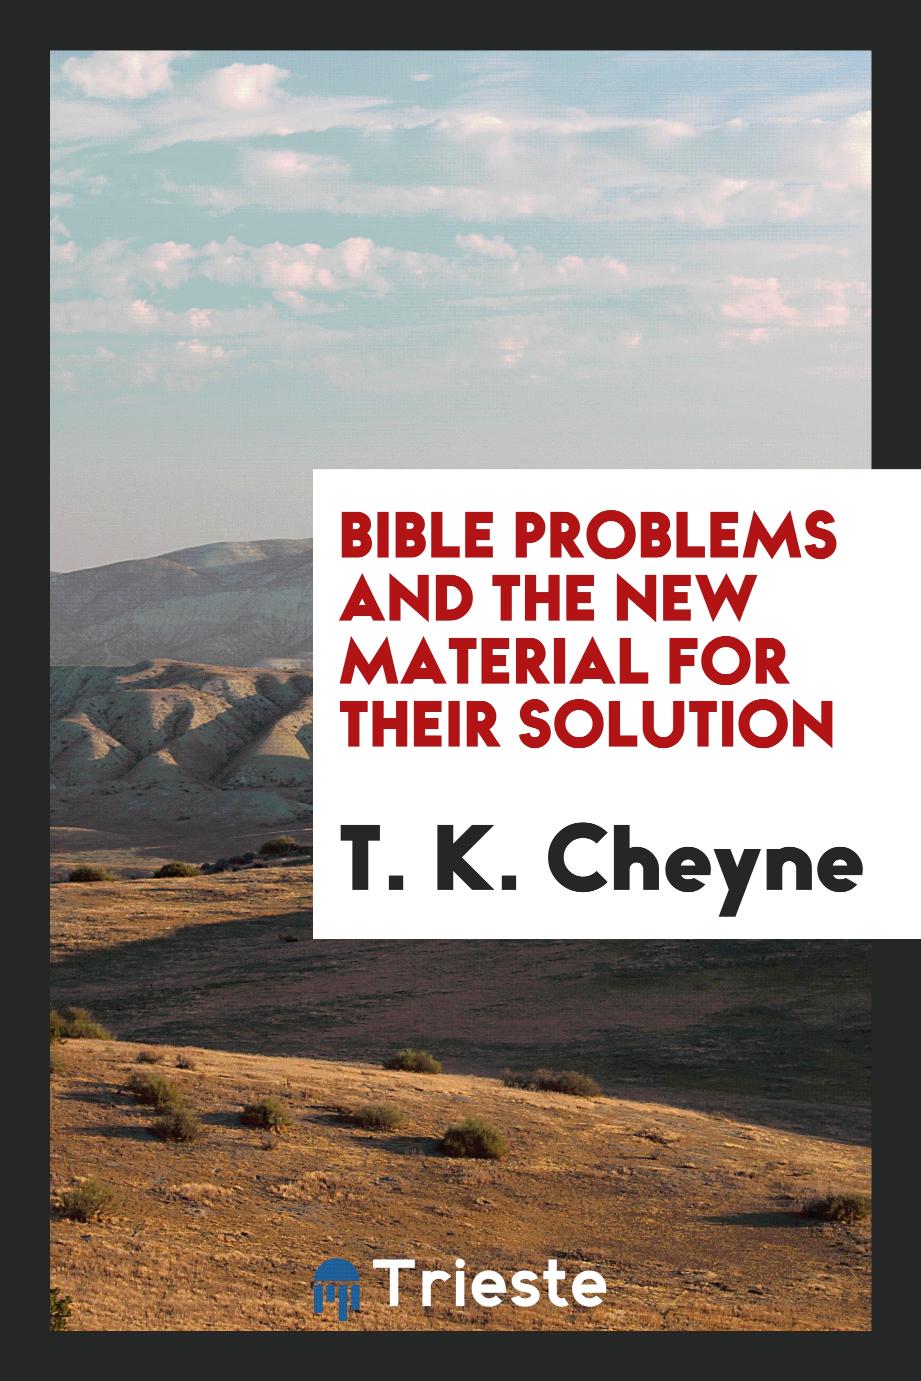 Bible problems and the new material for their solution